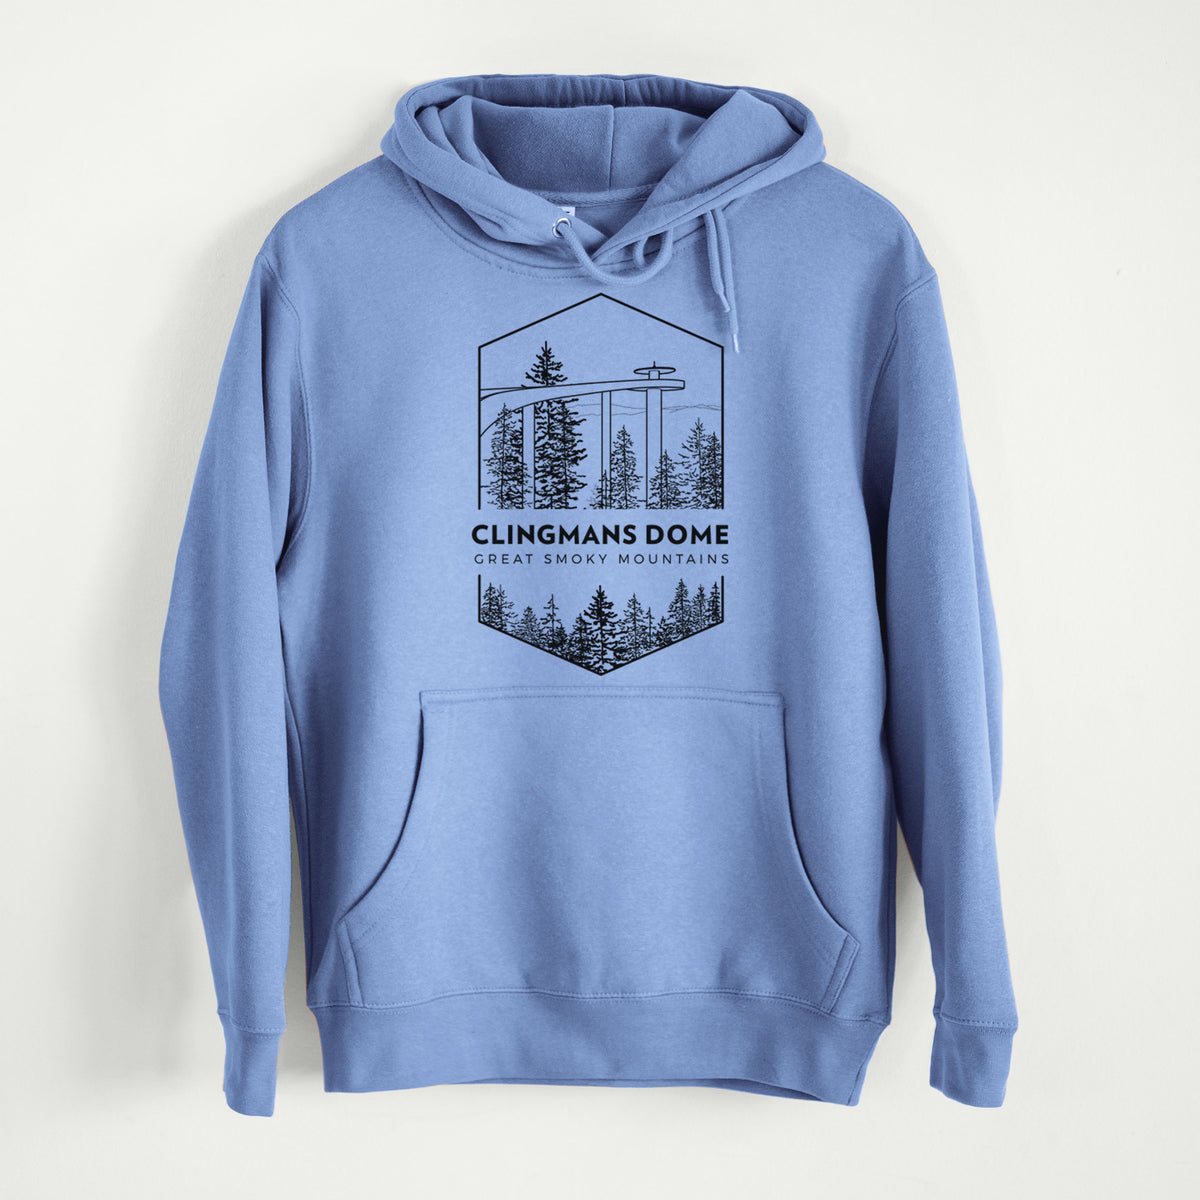 Clingmans Dome - Great Smoky Mountains National Park  - Mid-Weight Unisex Premium Blend Hoodie